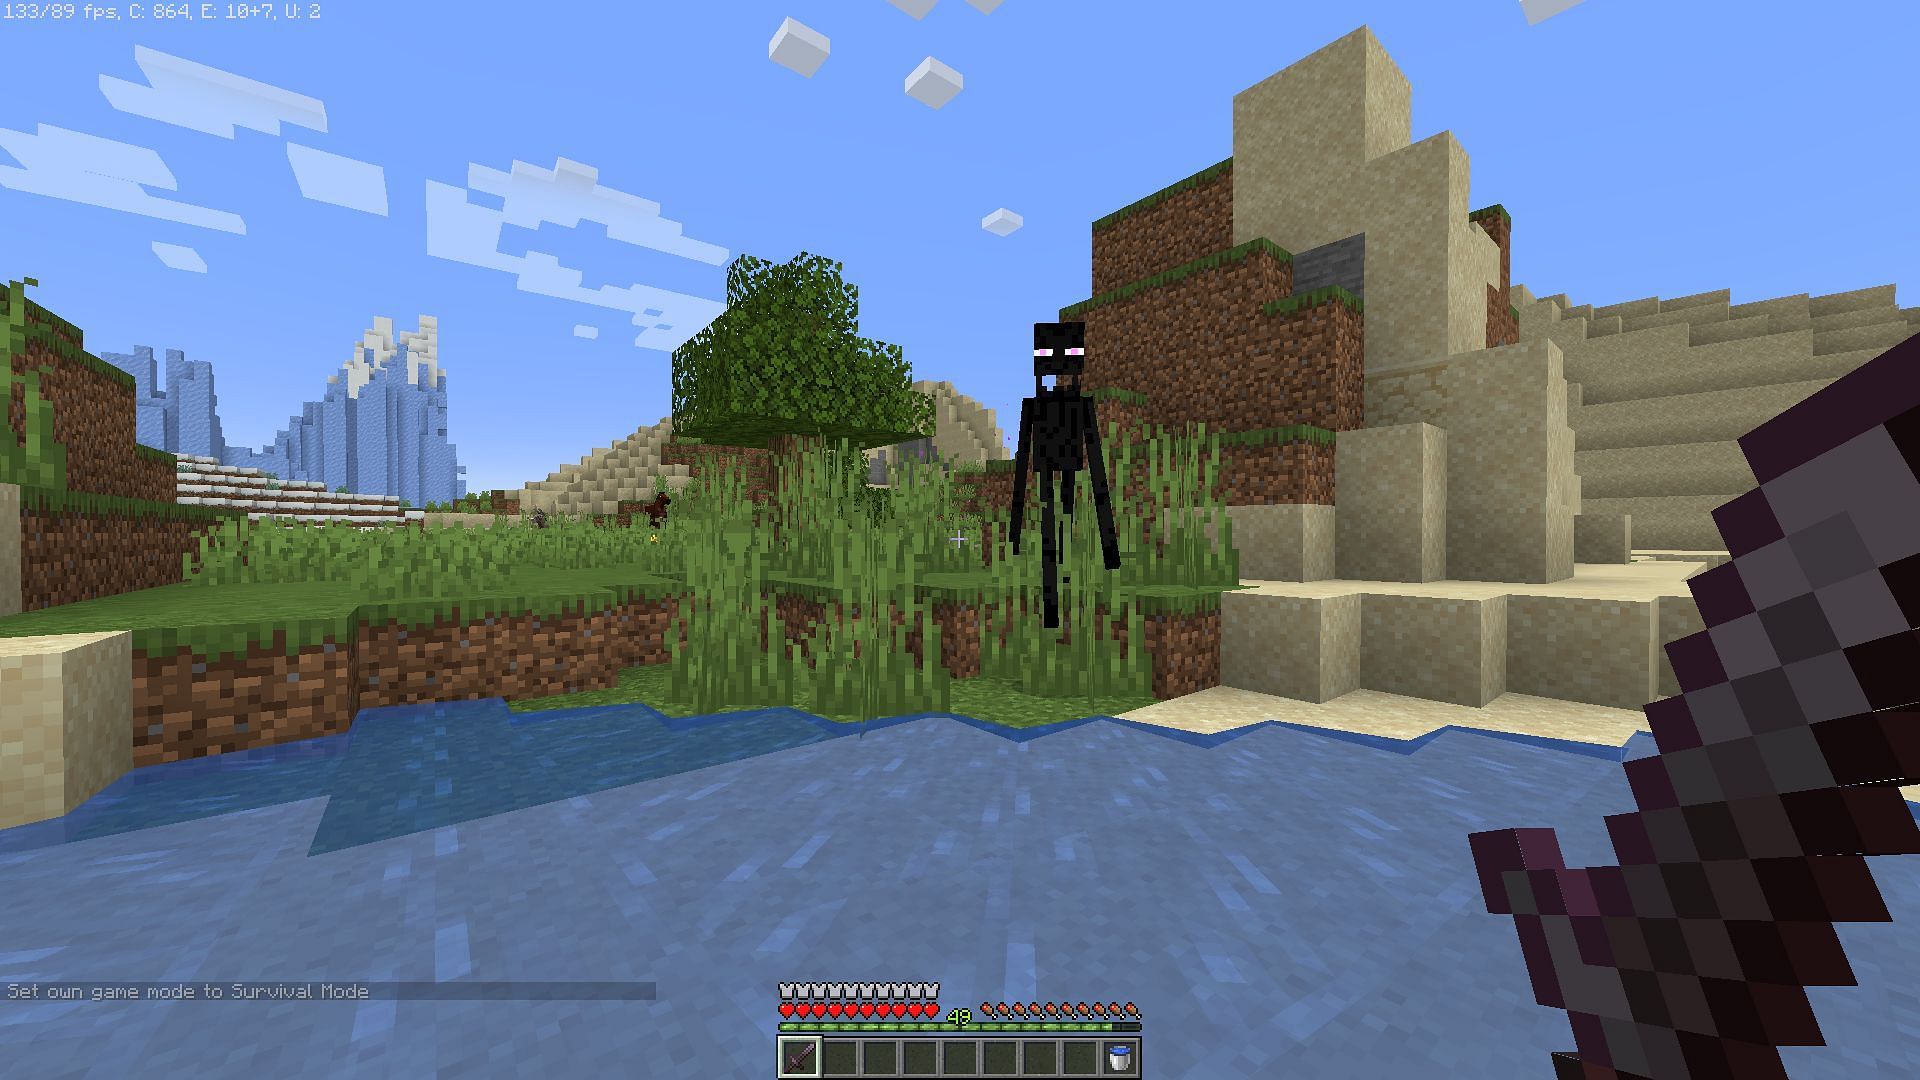 Enderman teleporting sound jumpscares players in Minecraft 1.19 update (Image via Mojang)